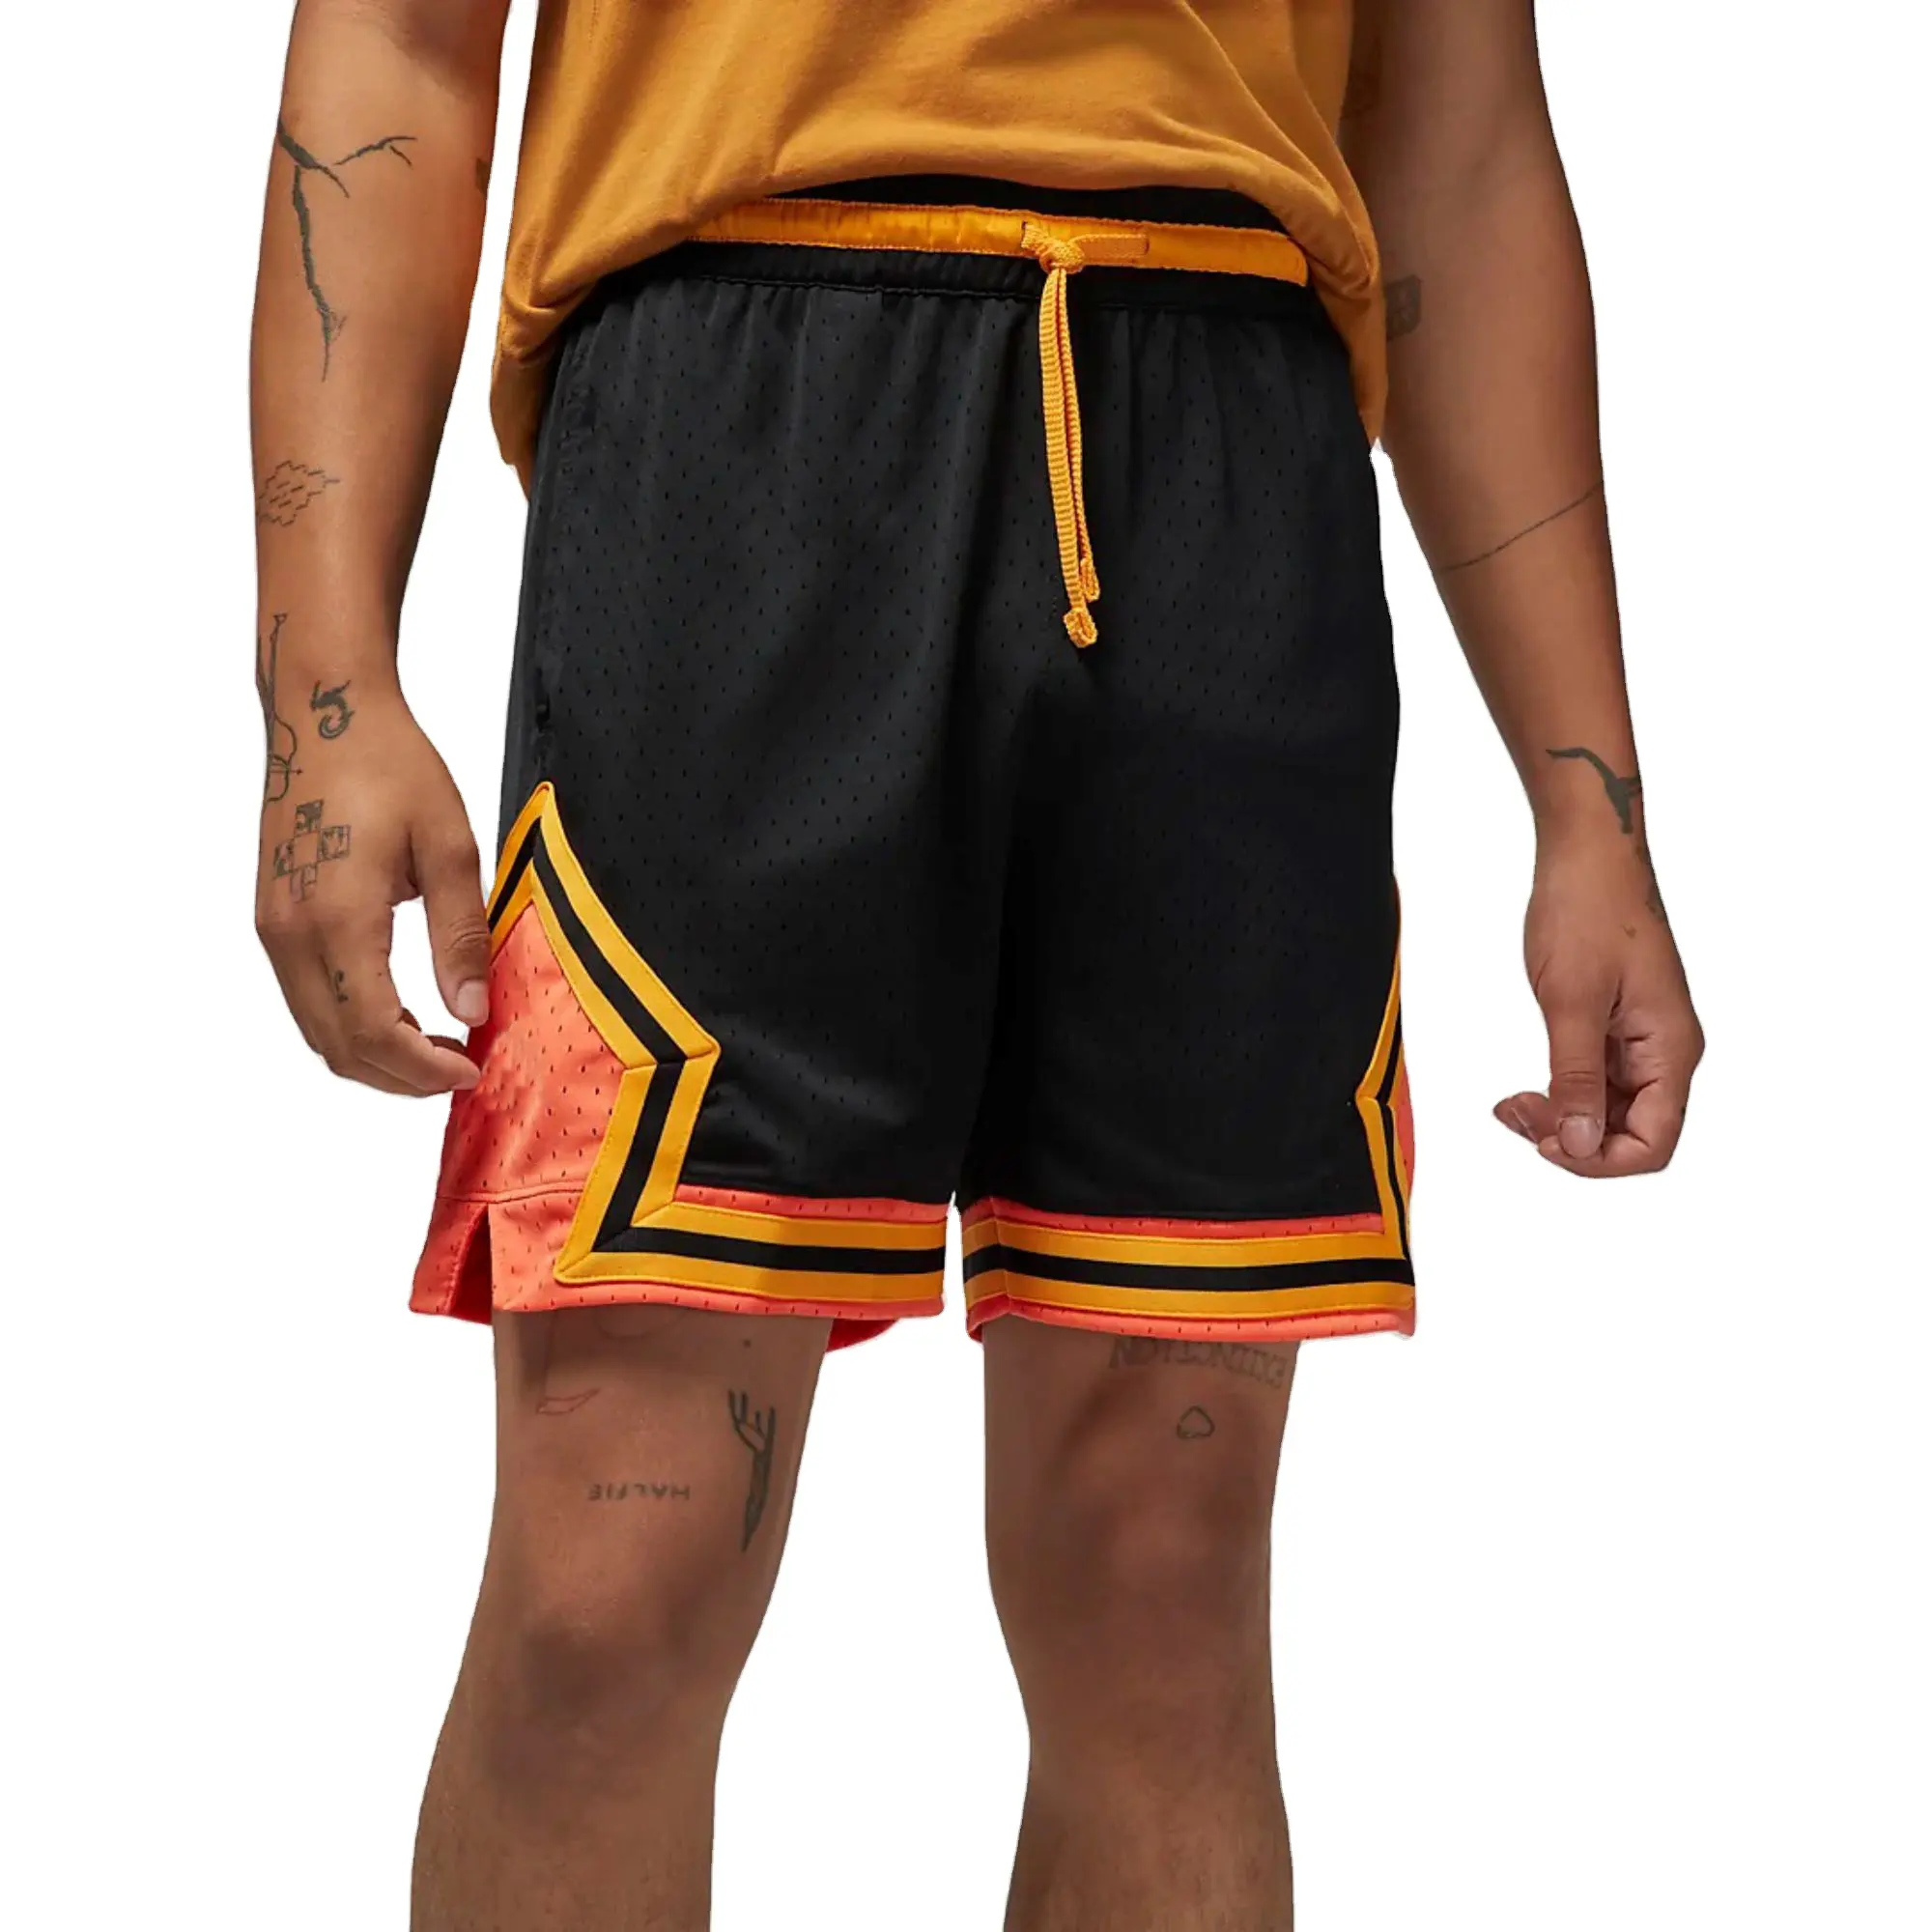 Dry and Comfortable 100% Polyester Mesh Black & Turf Orange Mens Diamond Shorts with Elastic Waistband and Striped Knit Tape